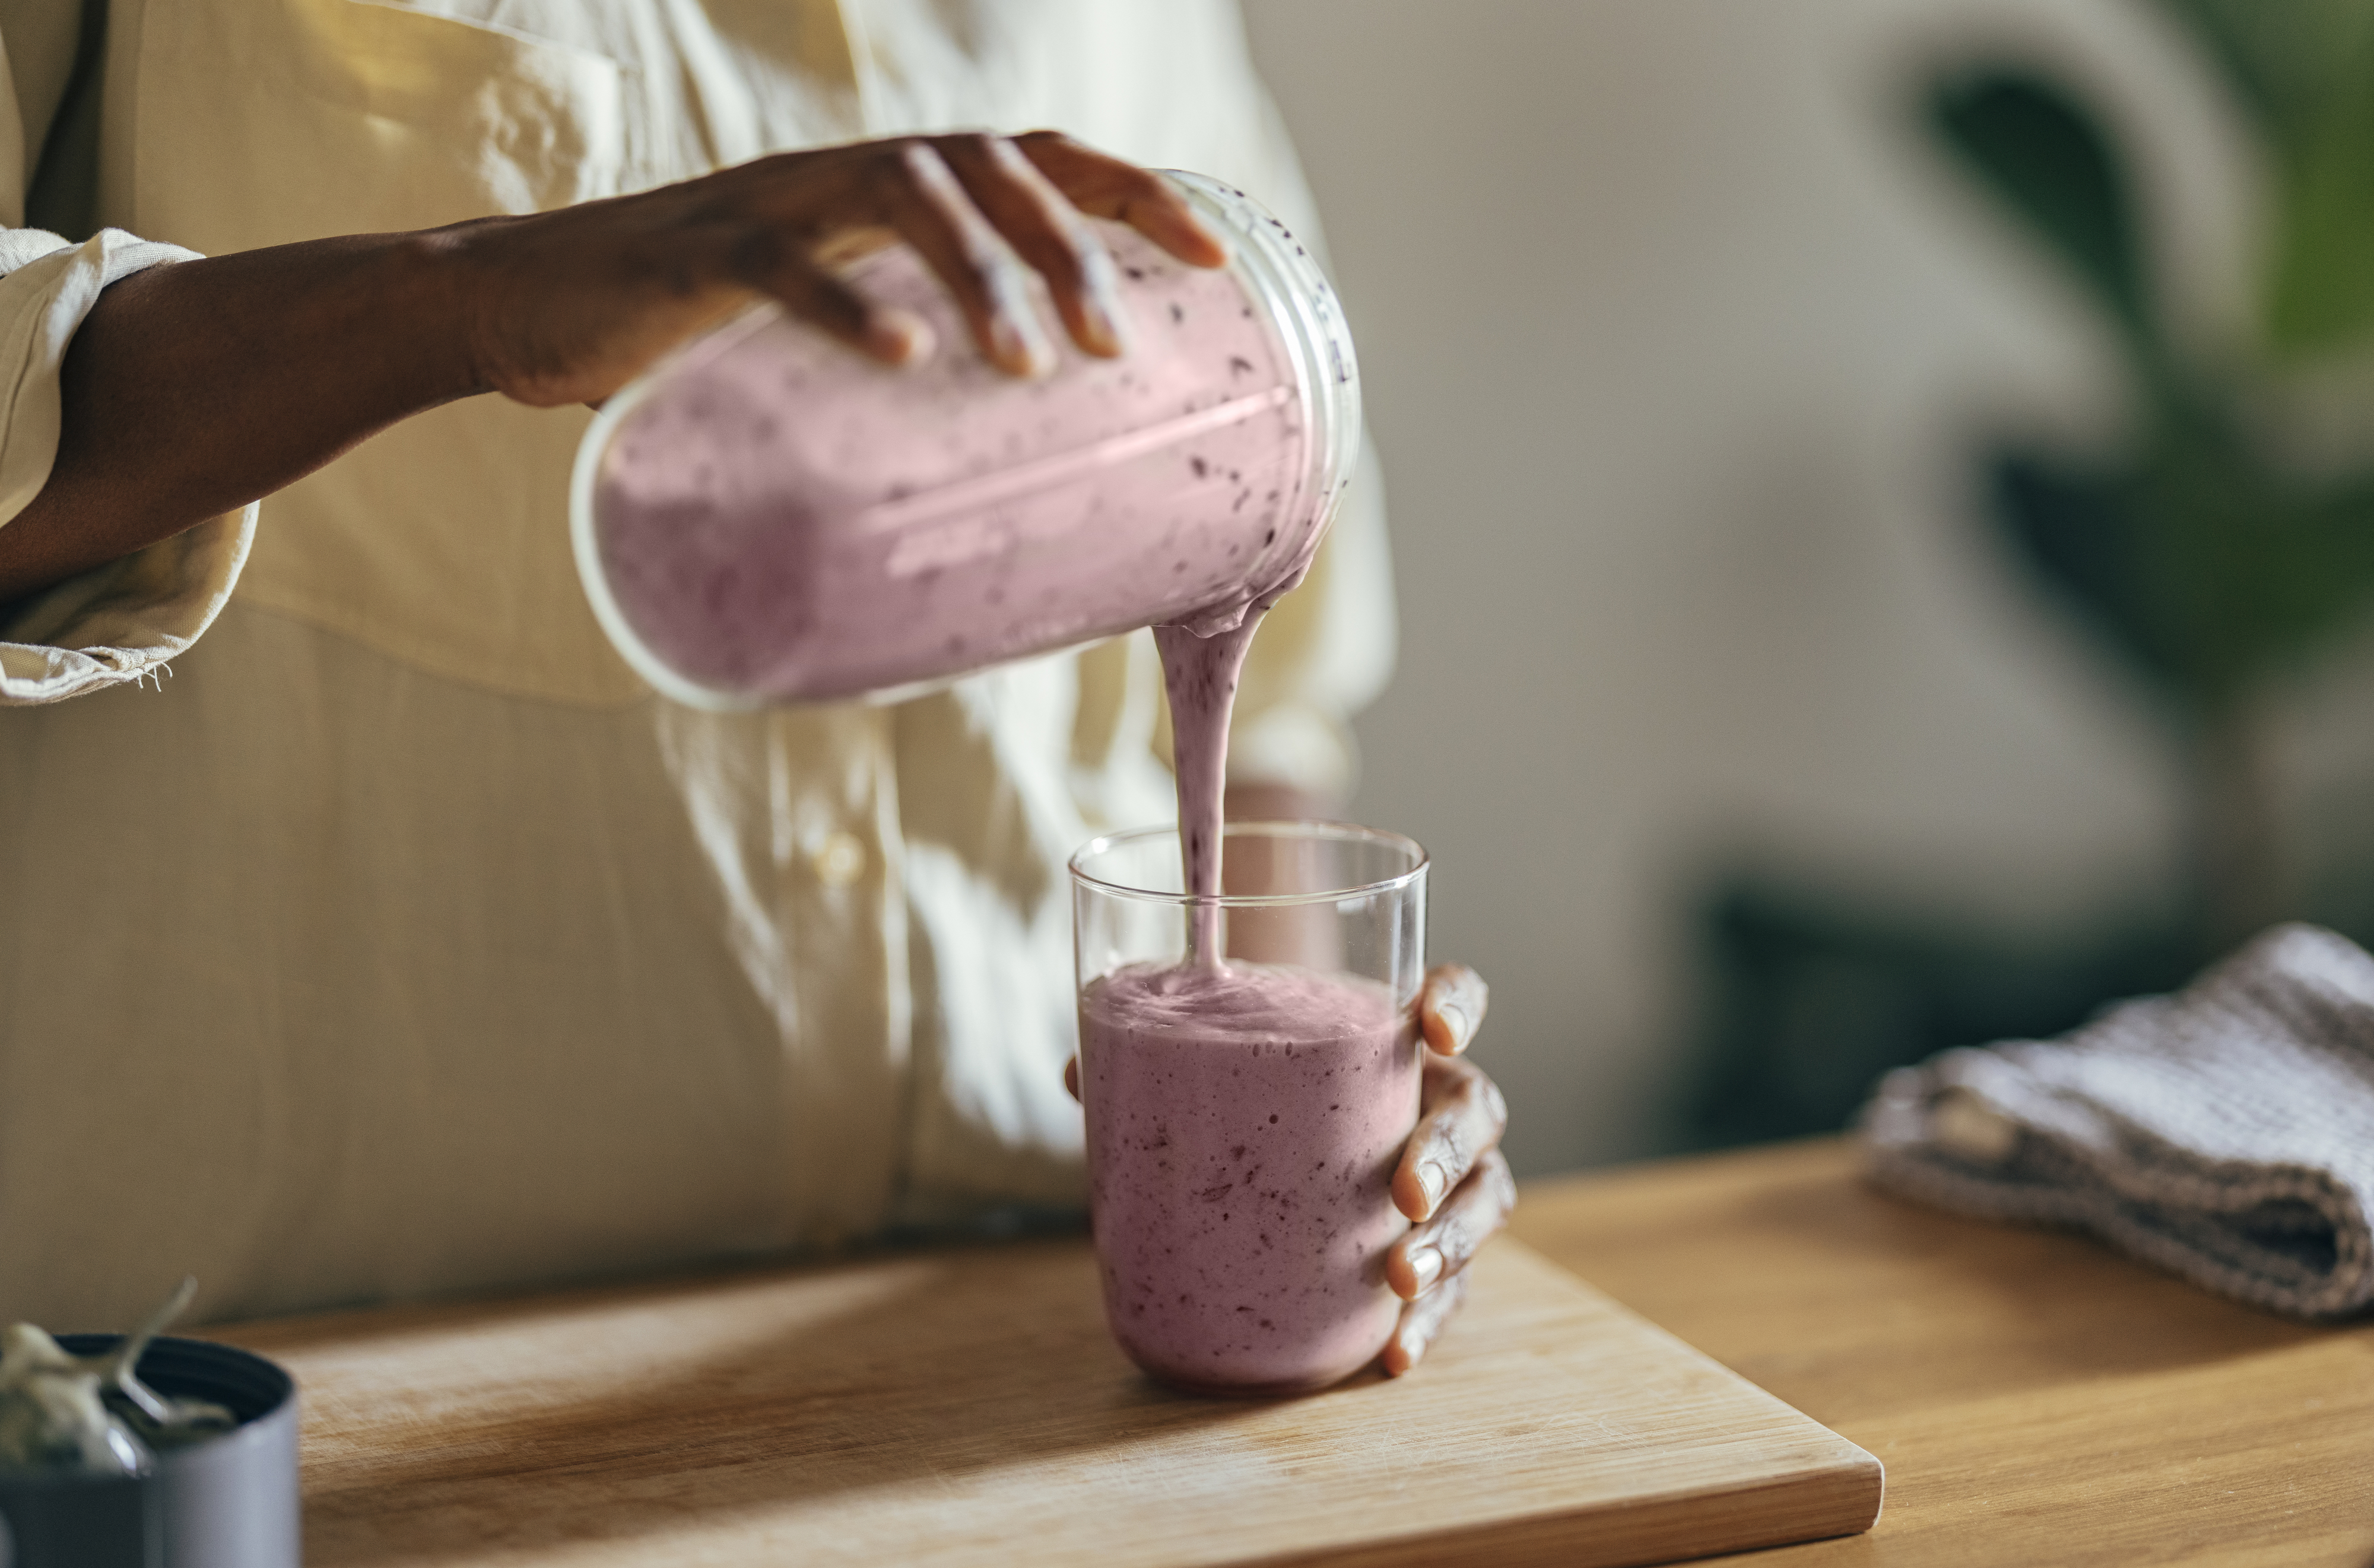 A person making a smoothie at home